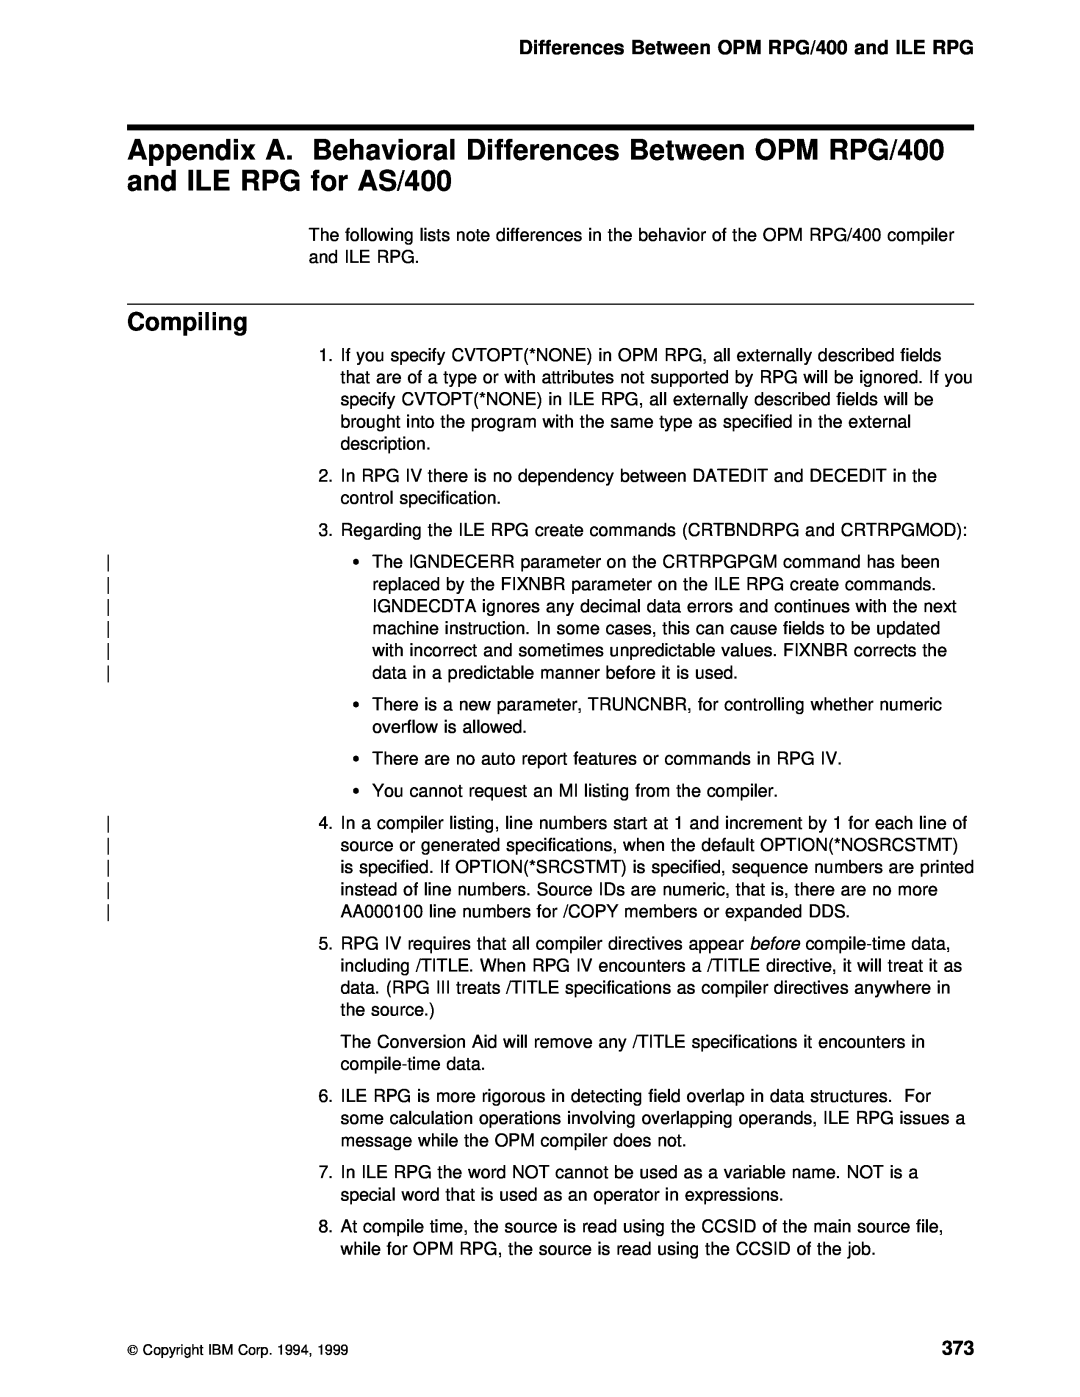 IBM AS/400 manual Appendix, Differences Between OPM RPG/400 and ILE RPG, Compiling 